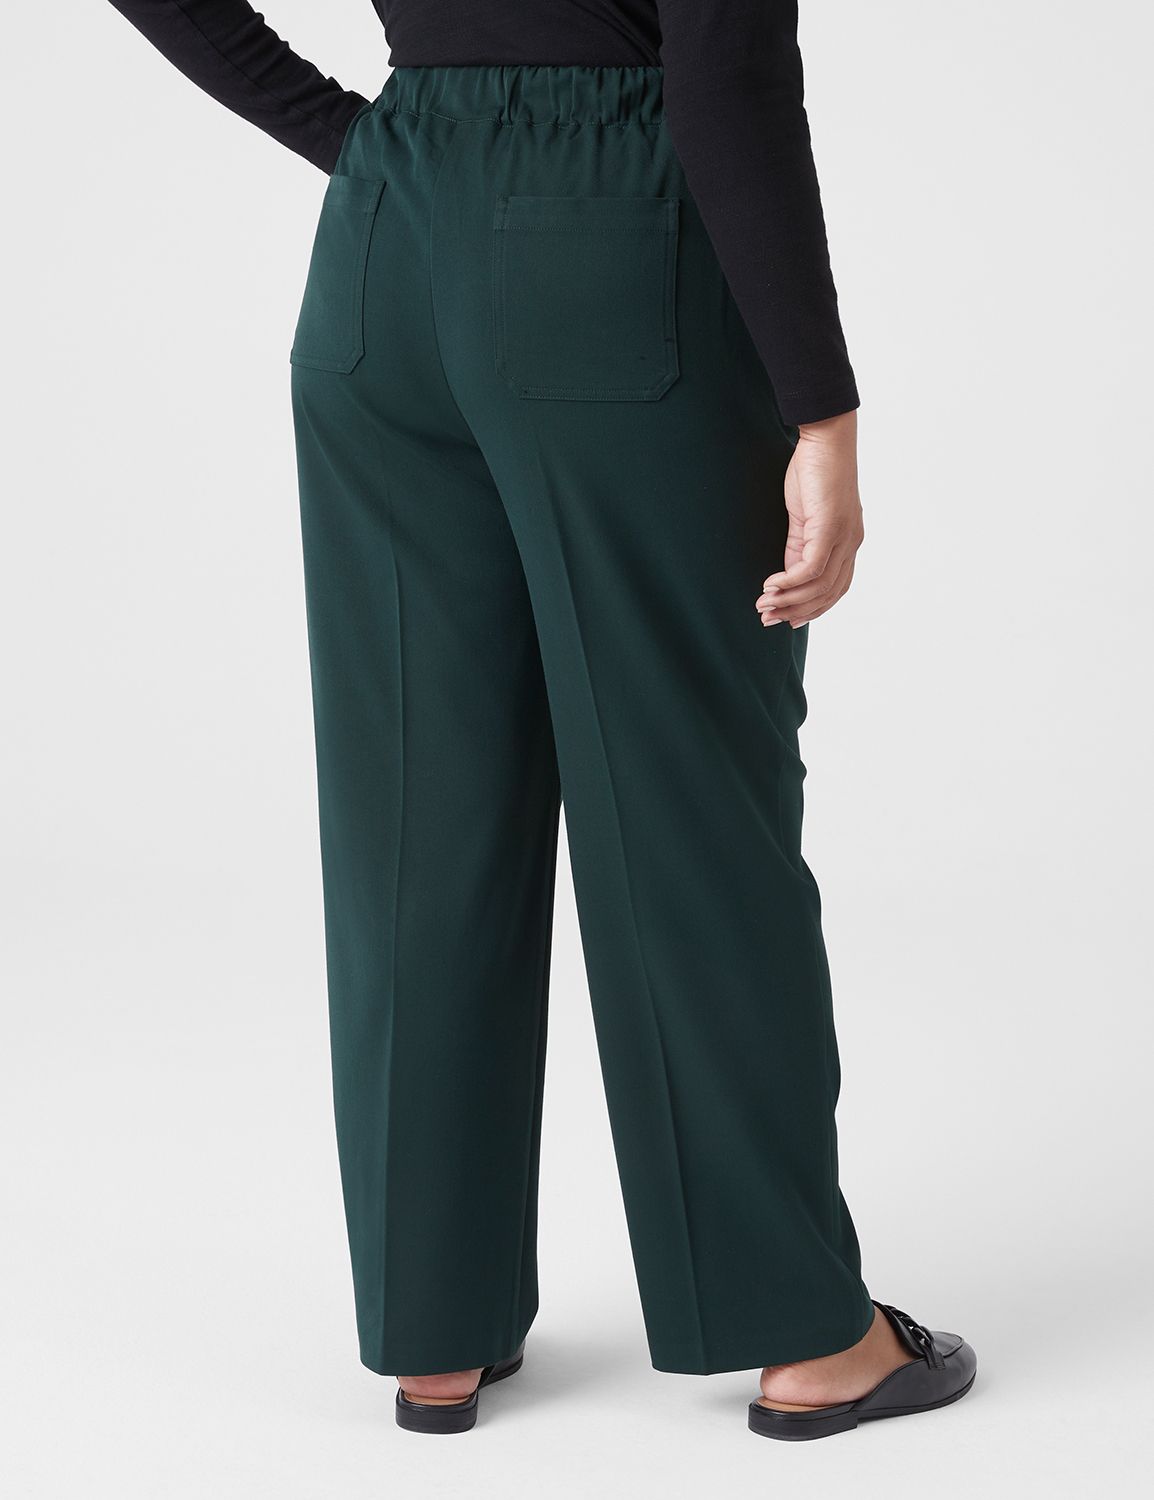 Spanx  Perfect Wide Leg Pant Black - Tryst Boutique